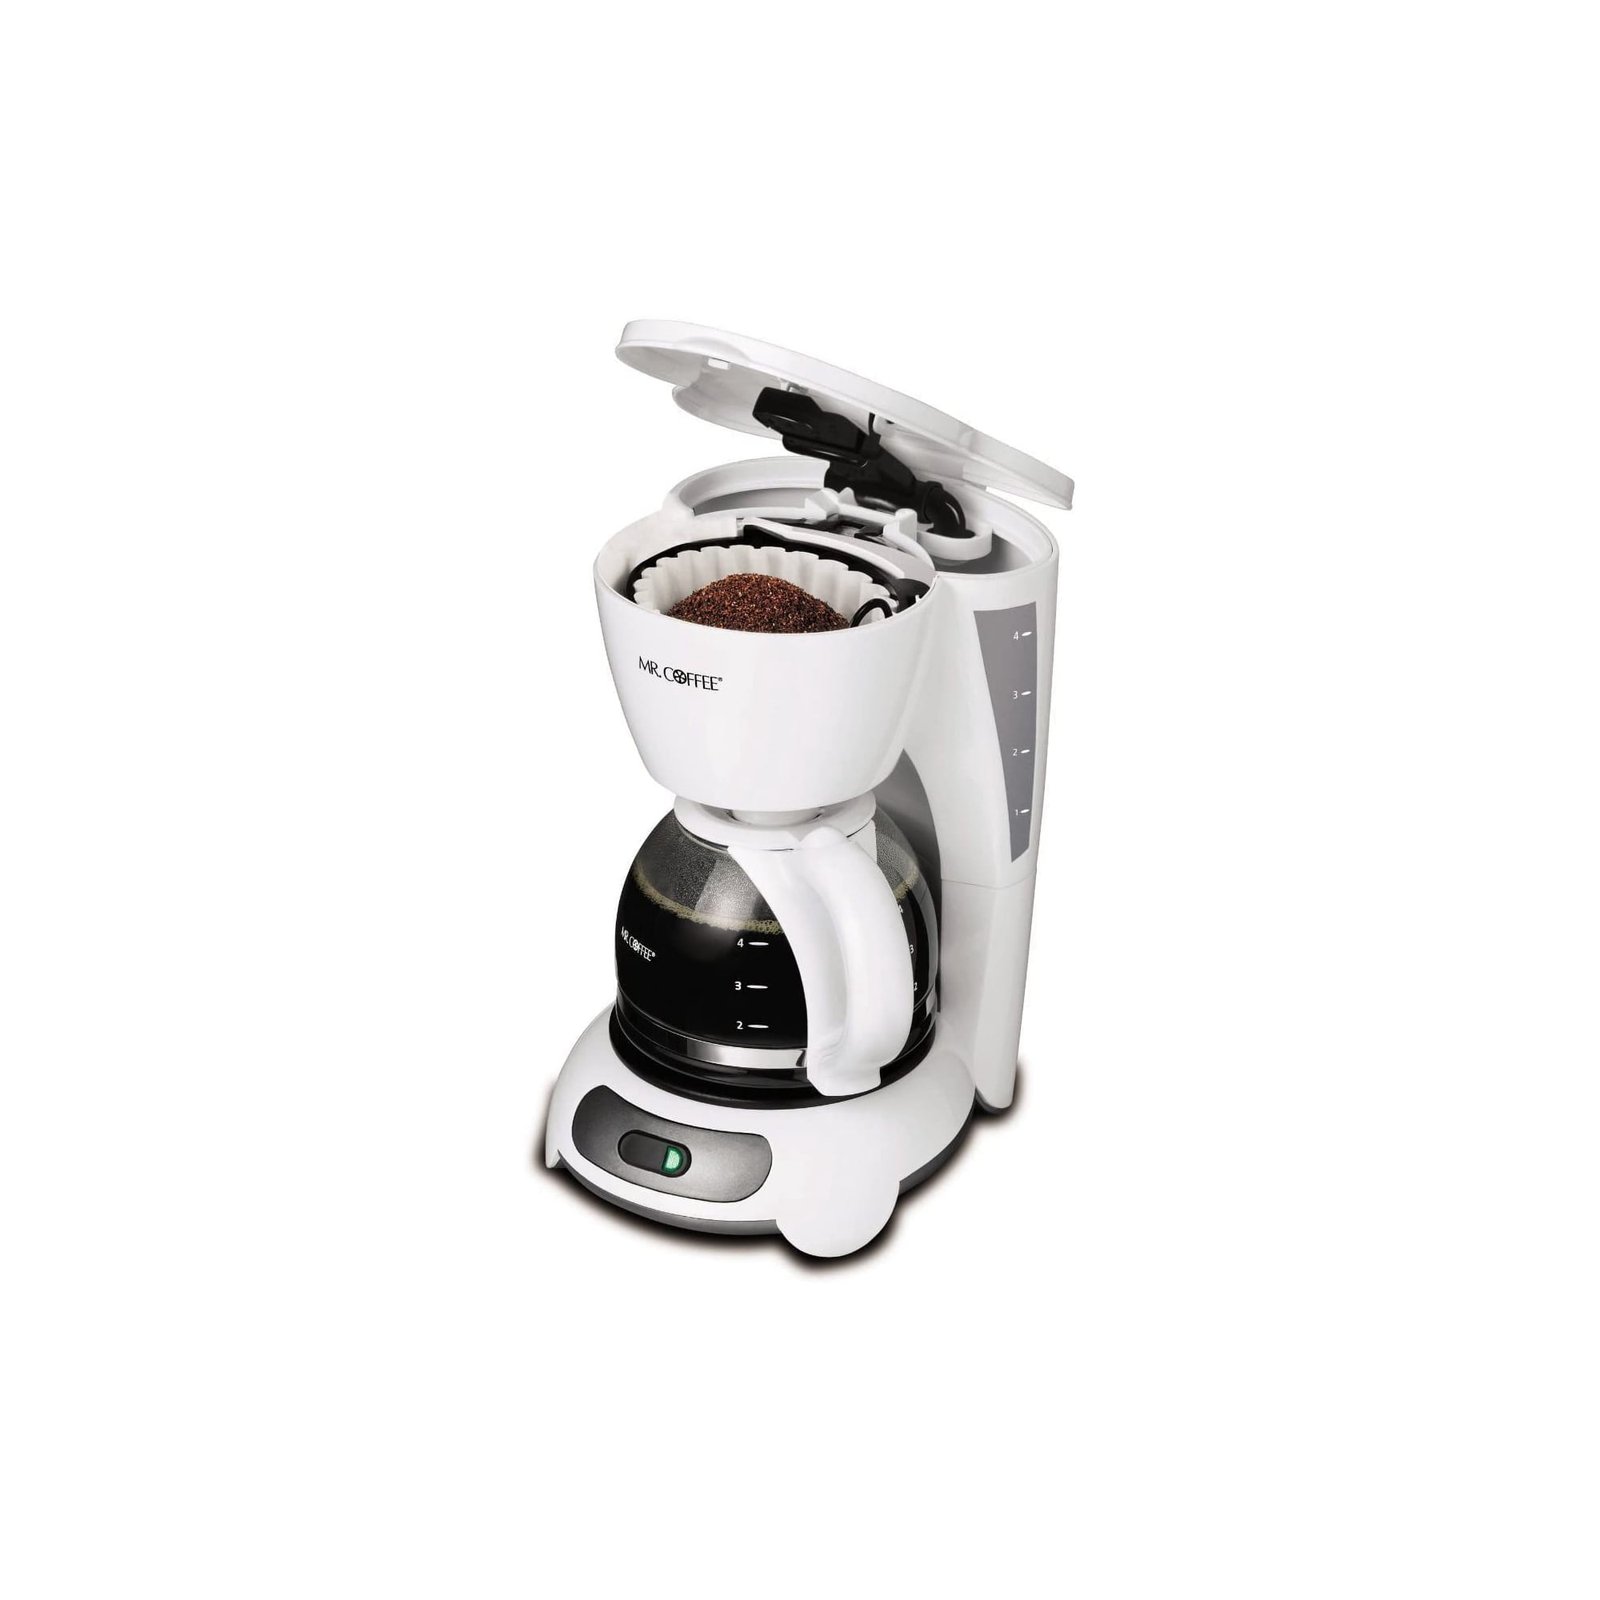 Mr. Coffee Black Simple Brew 4-Cup Switch Coffee Maker